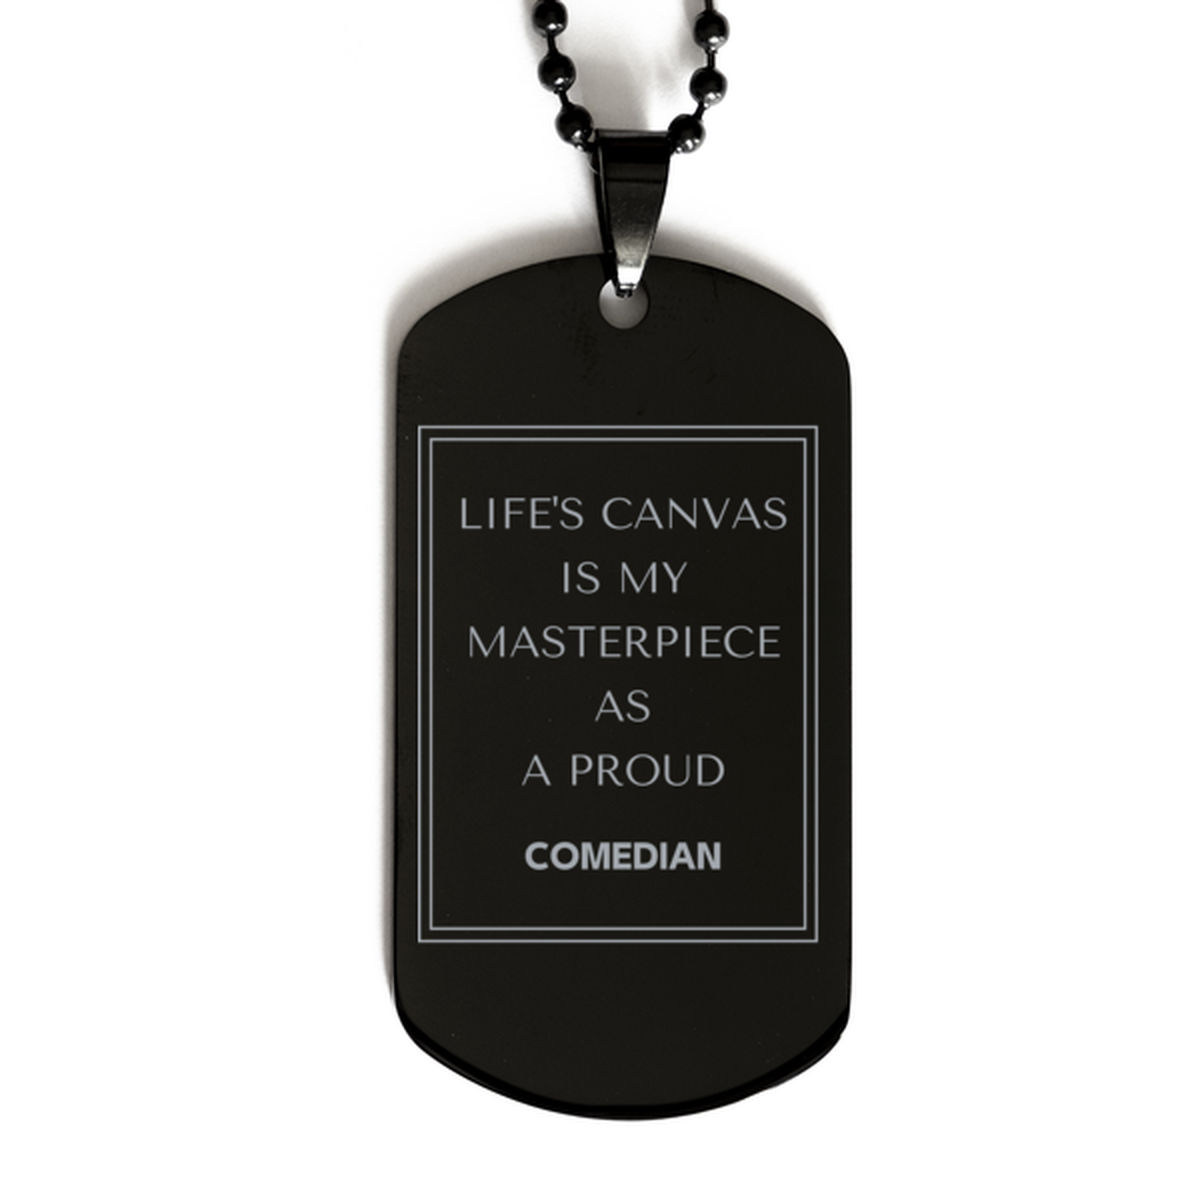 Proud Comedian Gifts, Life's canvas is my masterpiece, Epic Birthday Christmas Unique Black Dog Tag For Comedian, Coworkers, Men, Women, Friends